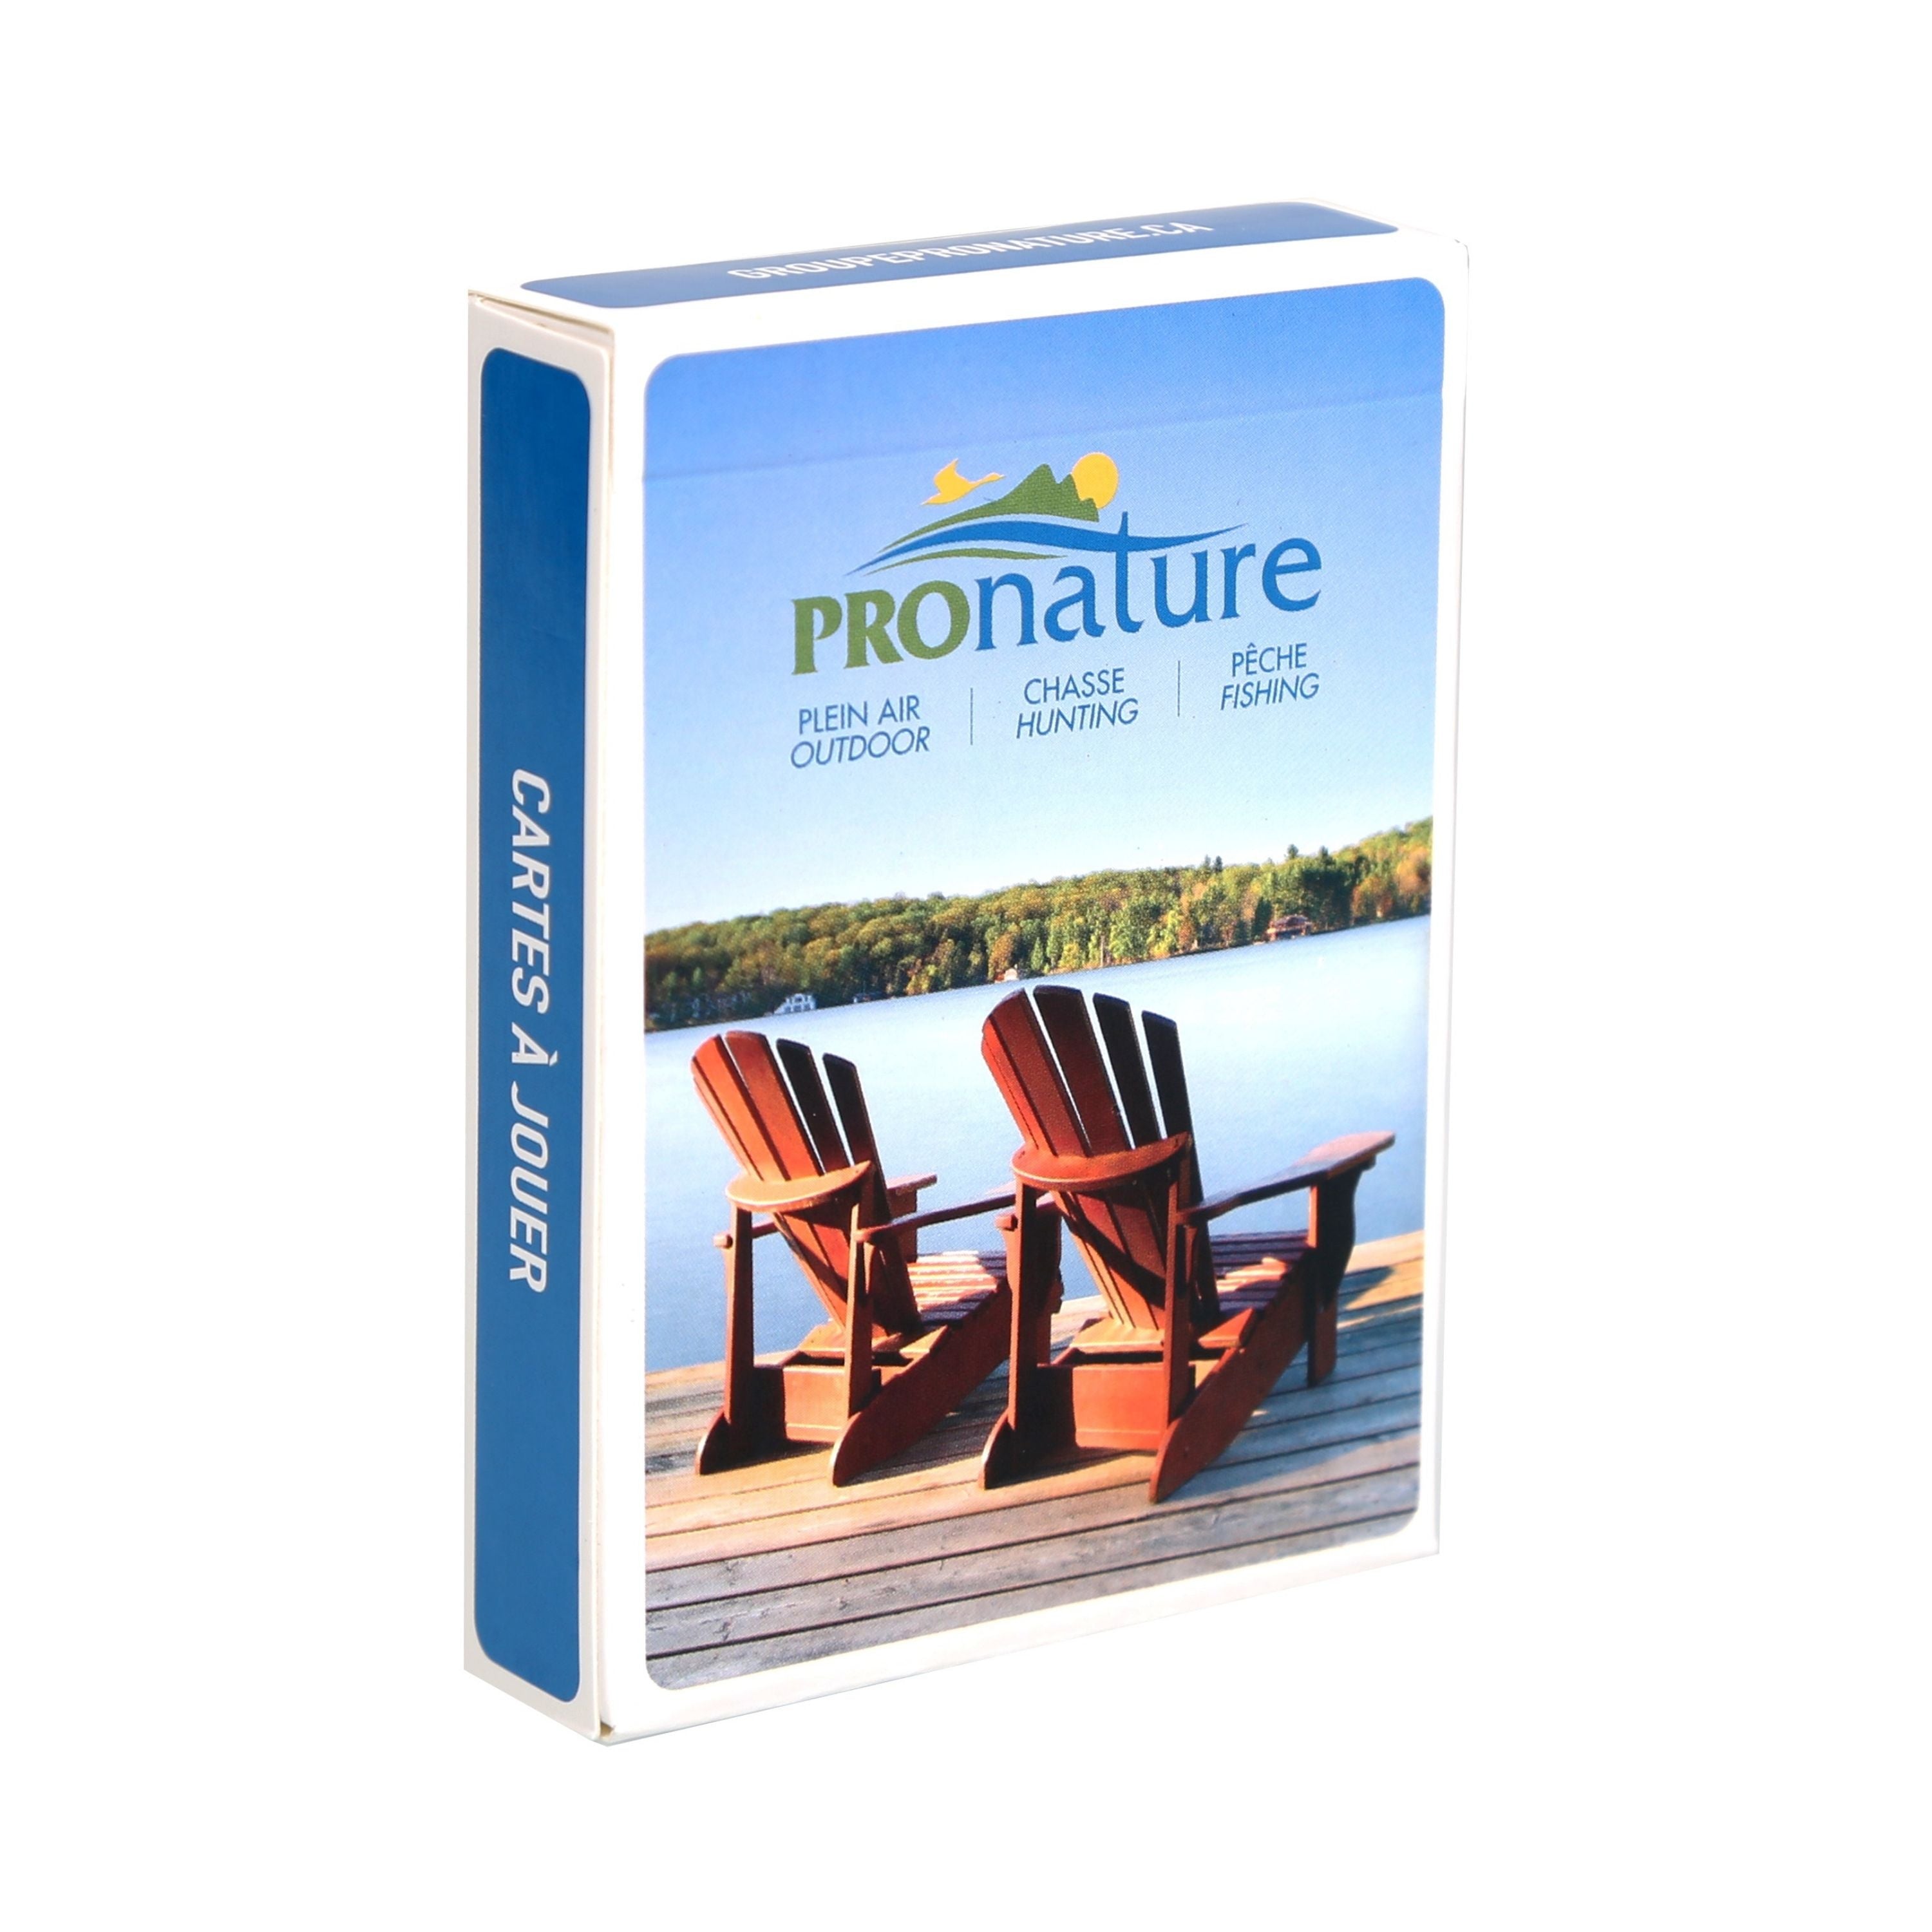 "Pronature" Playing cards